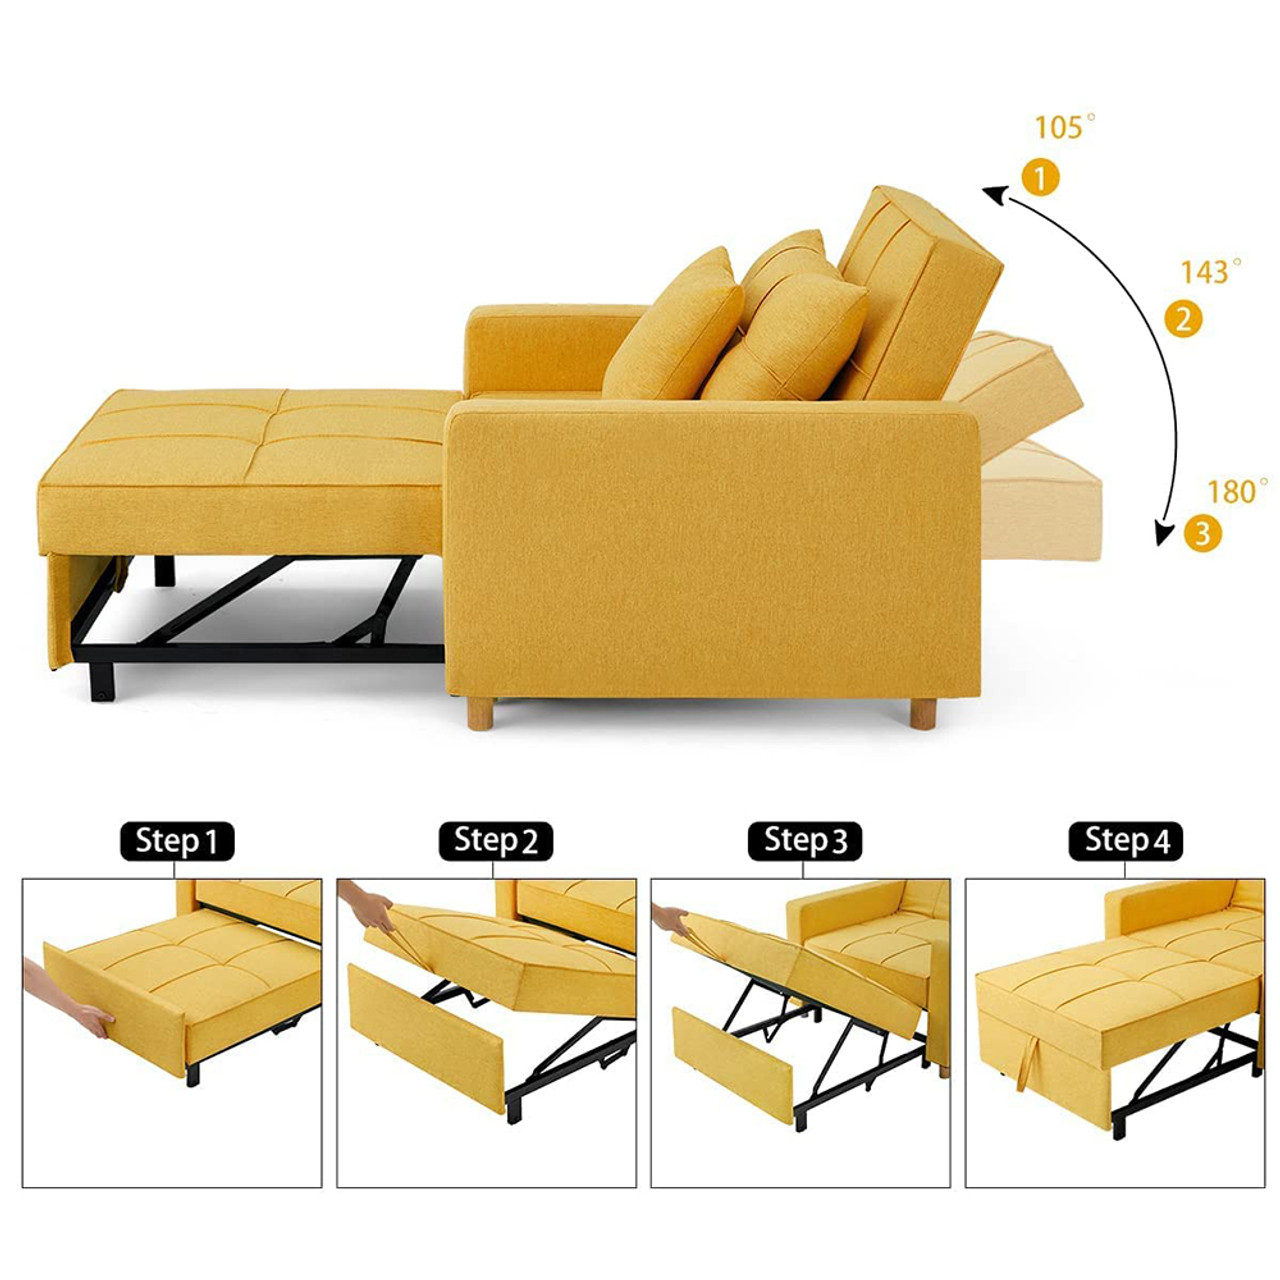 3-in-1 Sofa Bed Chair with Adjustable Backrest product image